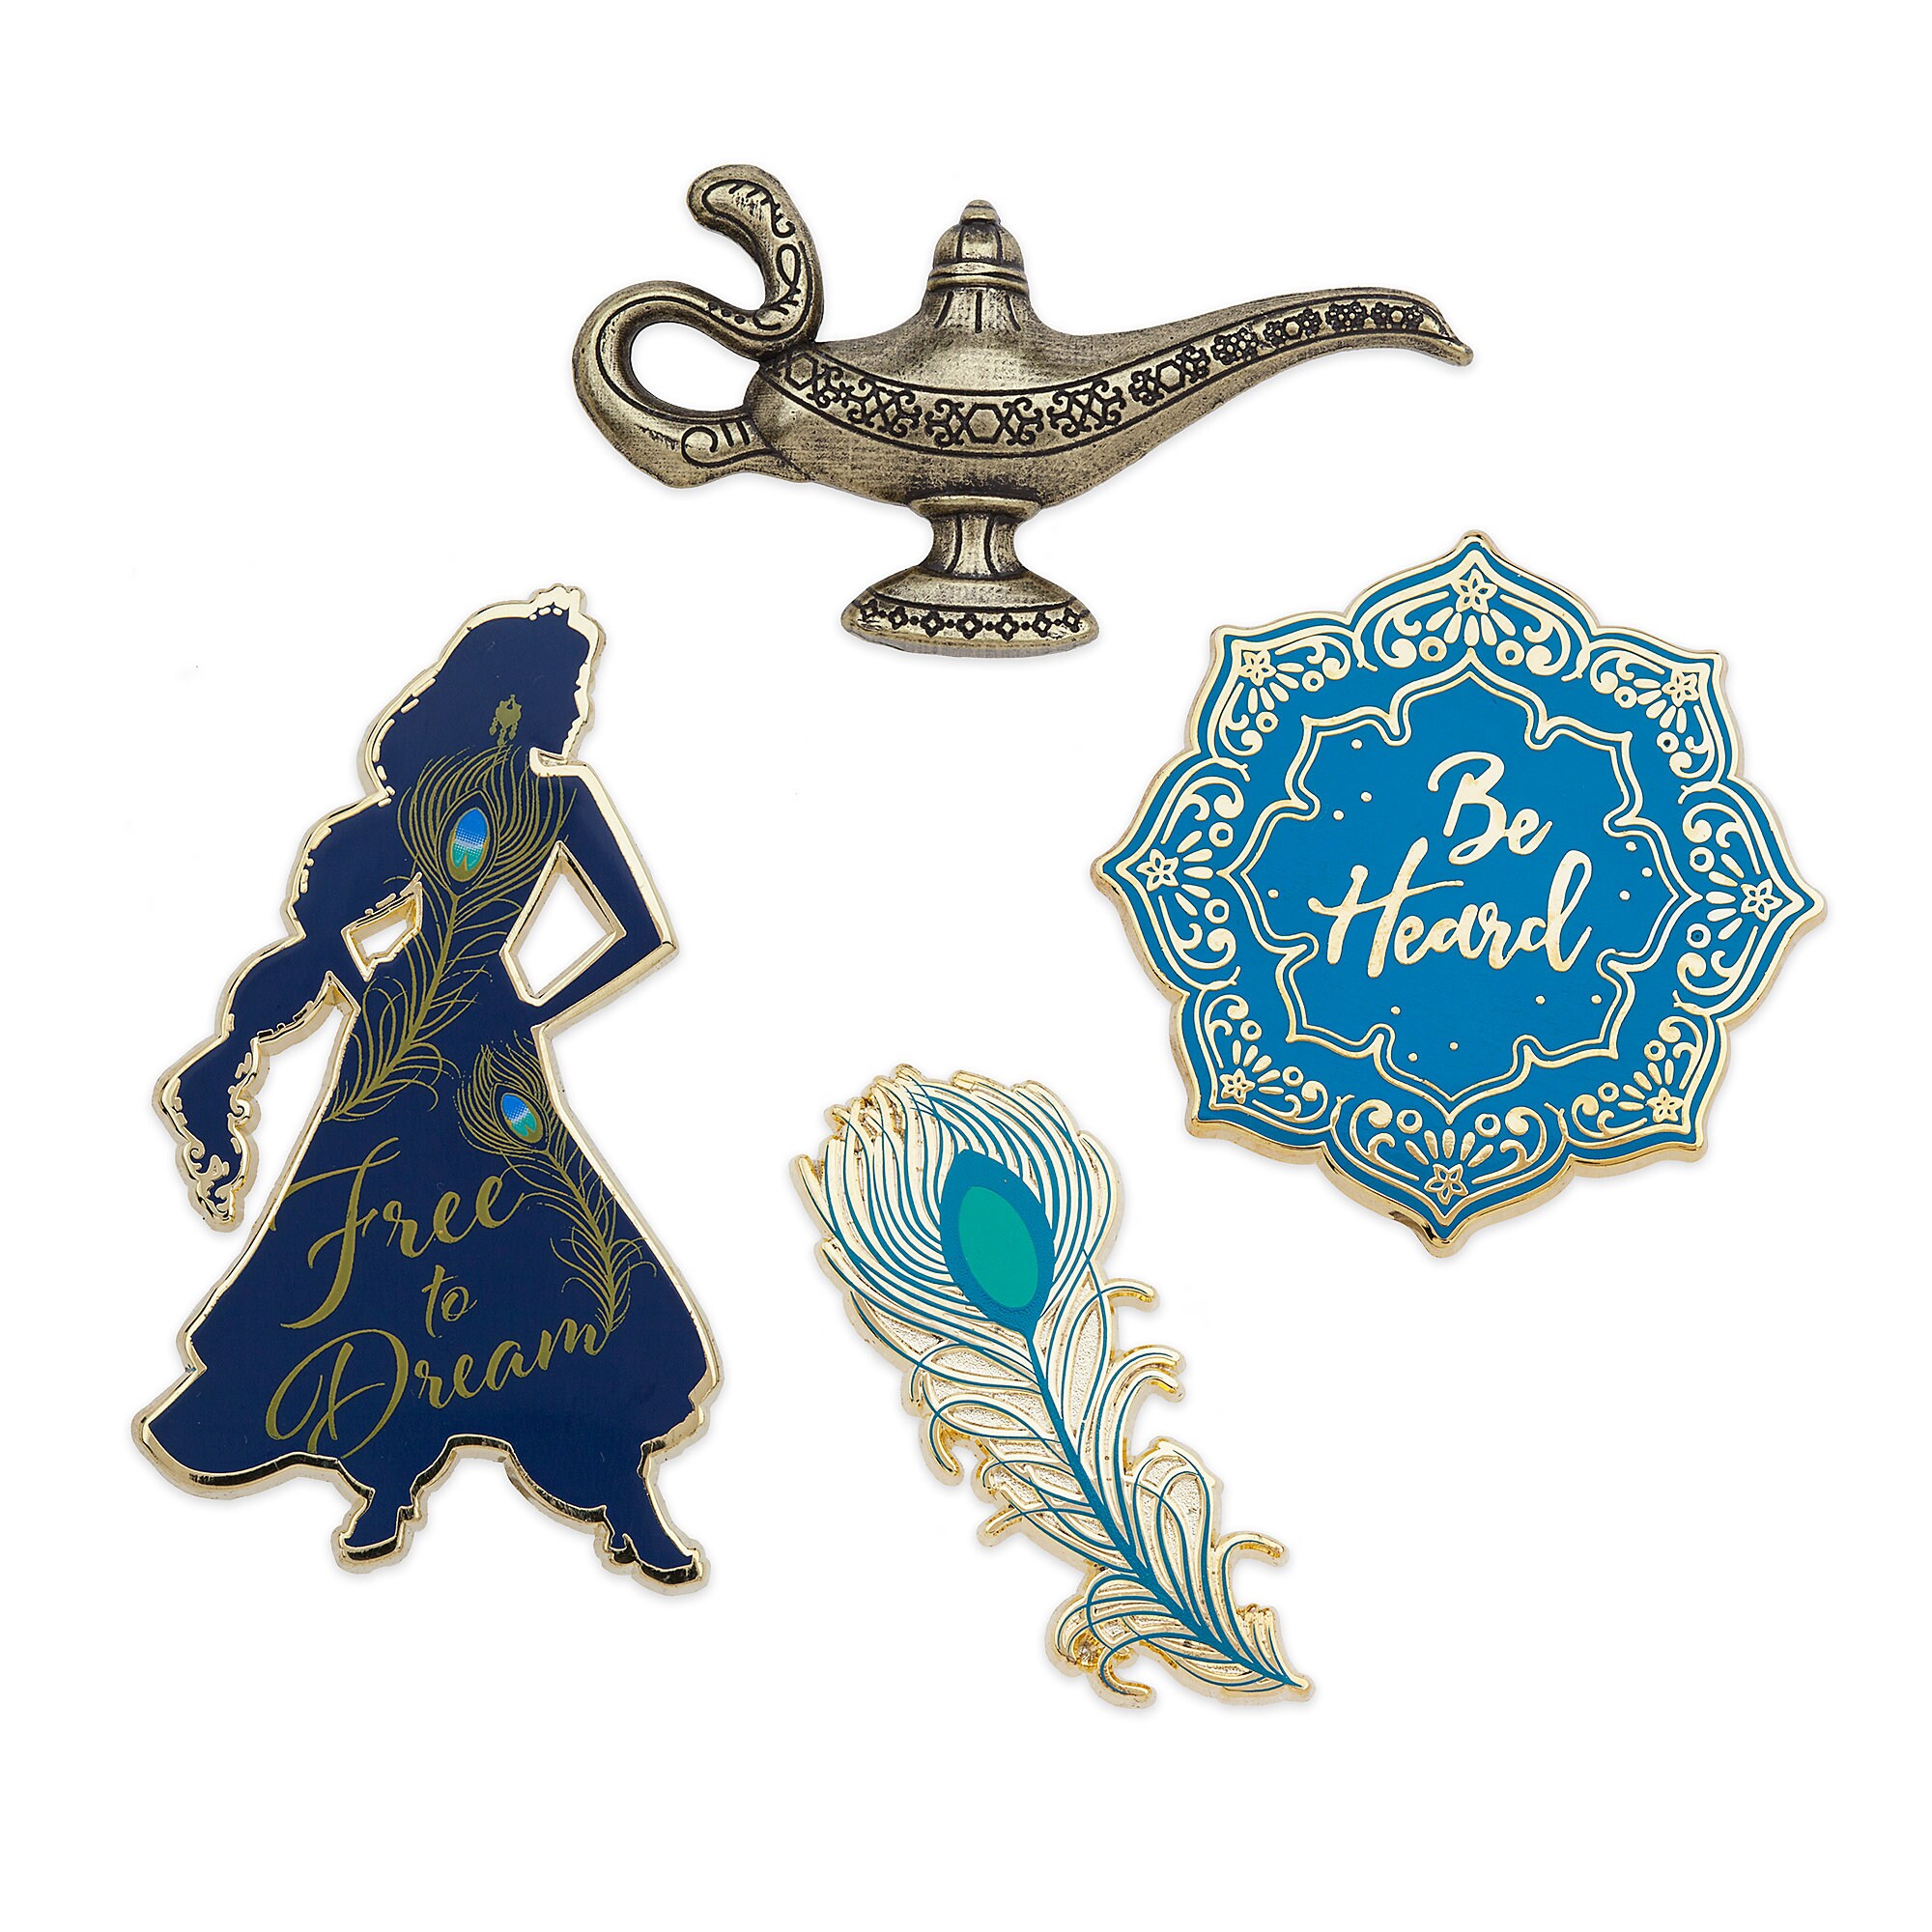 Aladdin Pin Set - Live Action Film - Limited Release